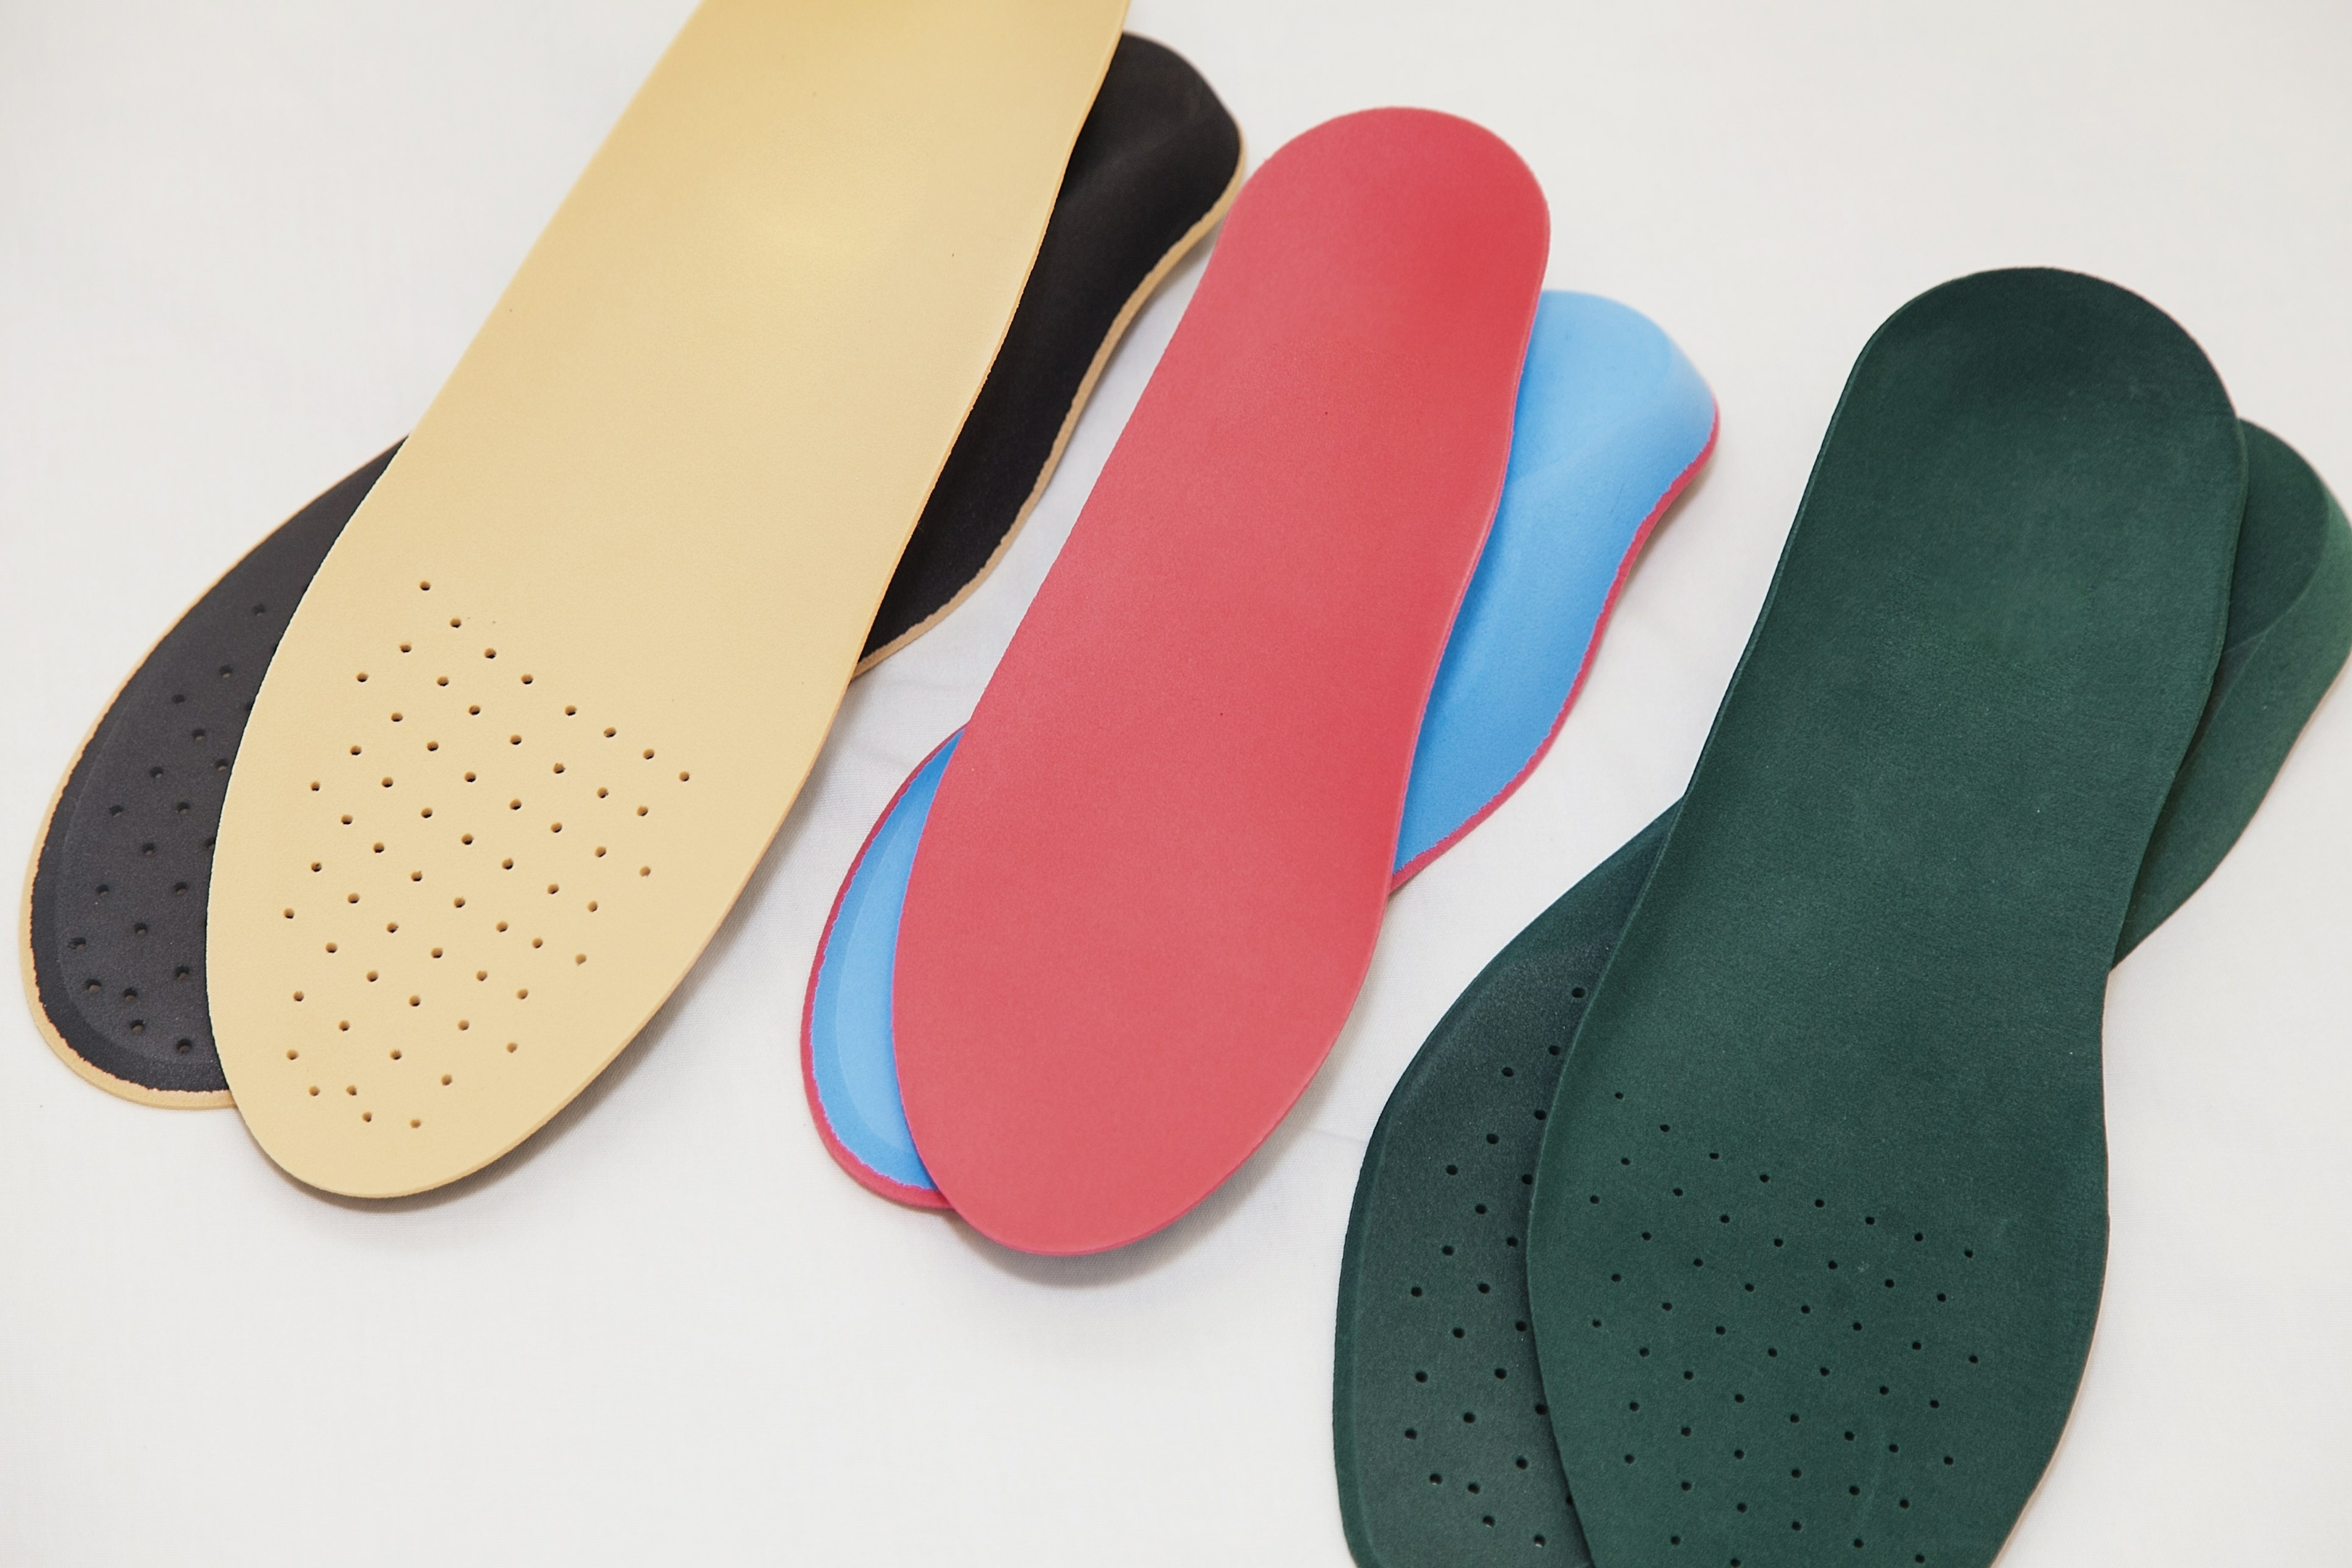 Both custom and over-the-counter orthotics come in a variety of different shapes and sizes for different foot shapes and needs.